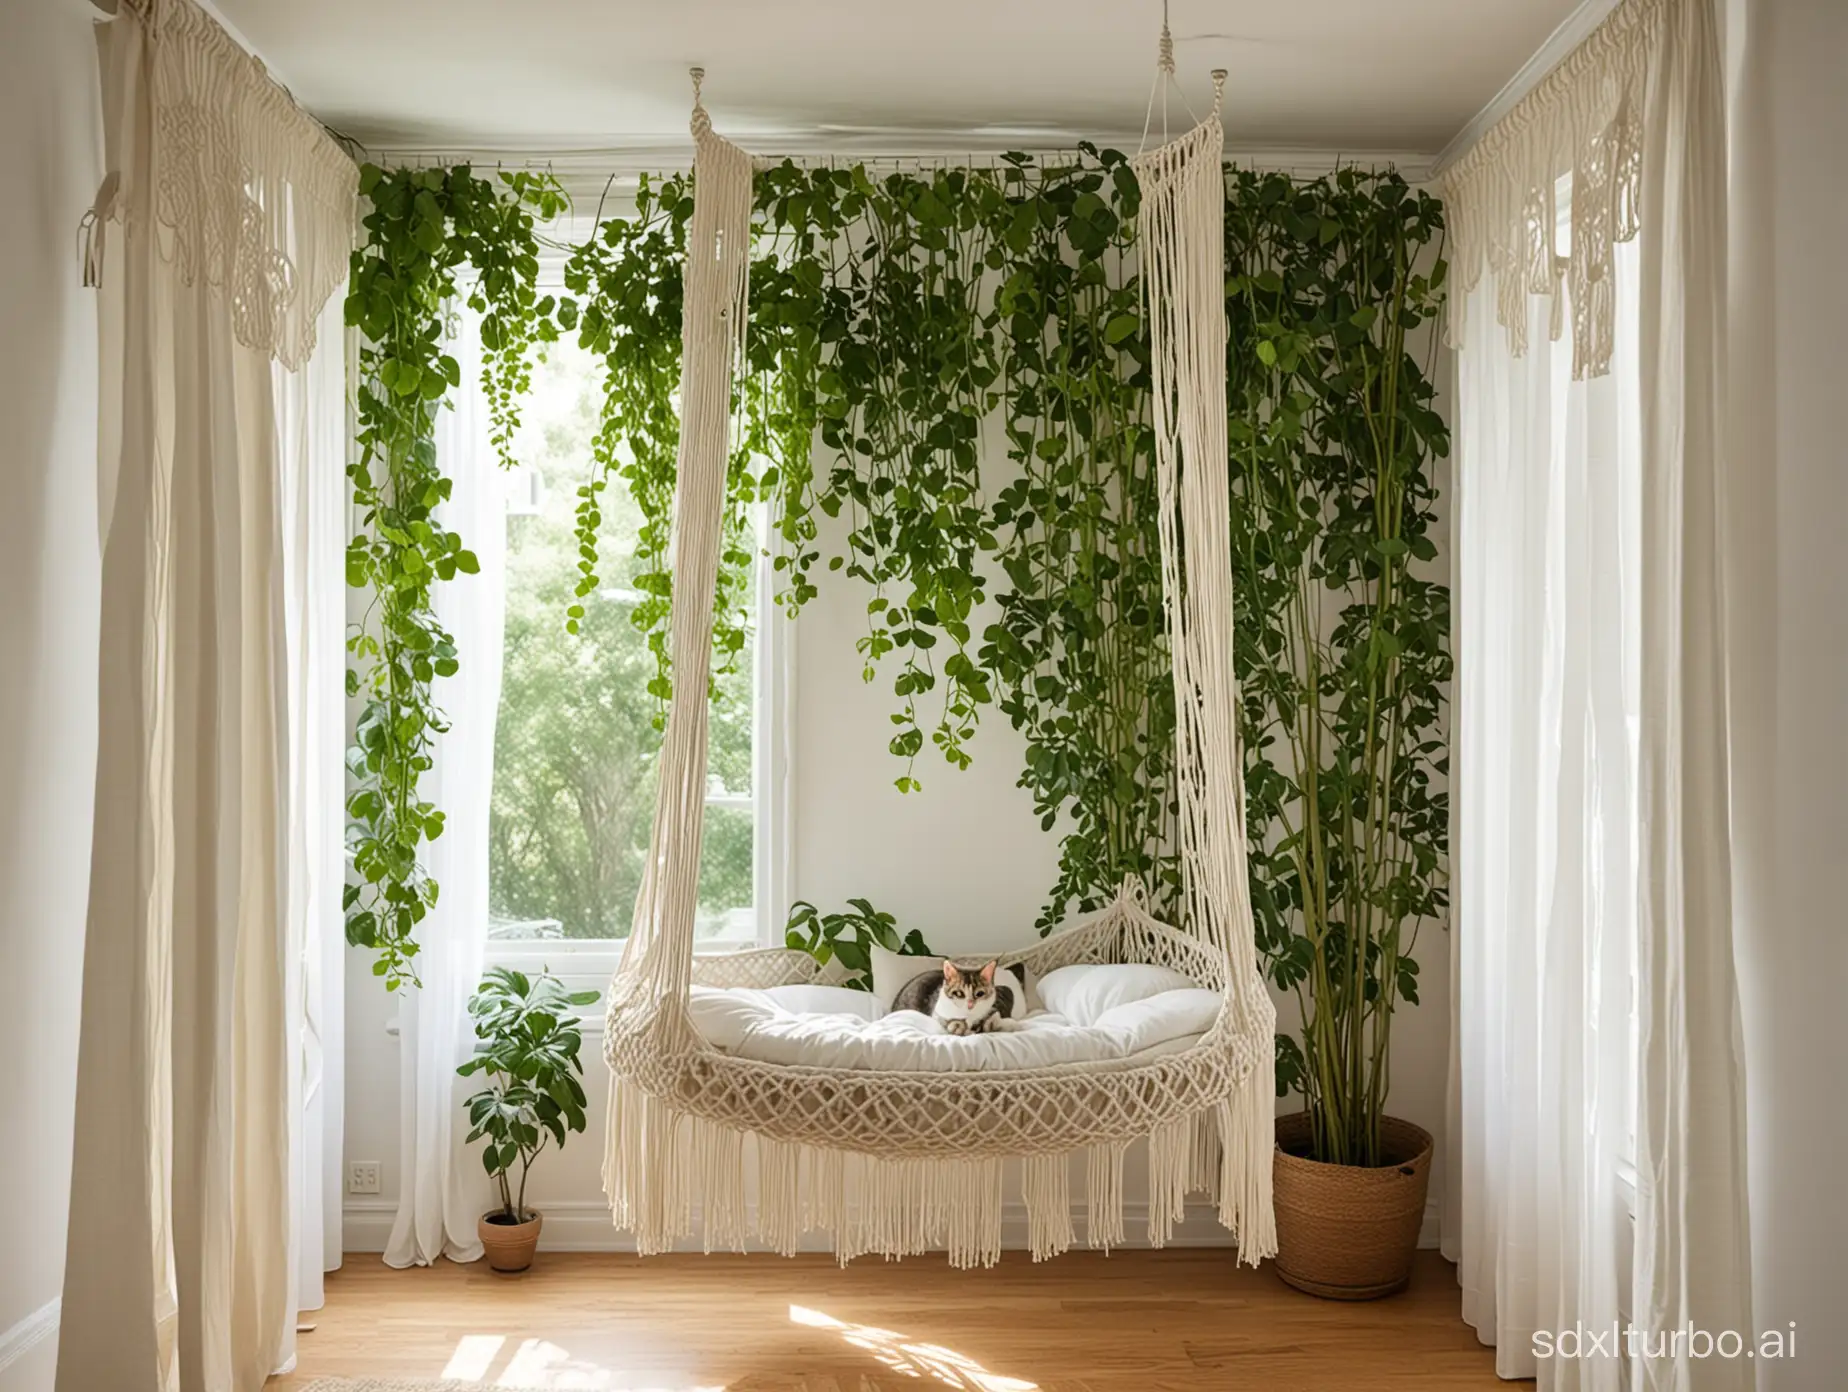 Summer-Breeze-Shadows-Macrame-Cat-Hanging-Bed-with-Blowing-Curtains